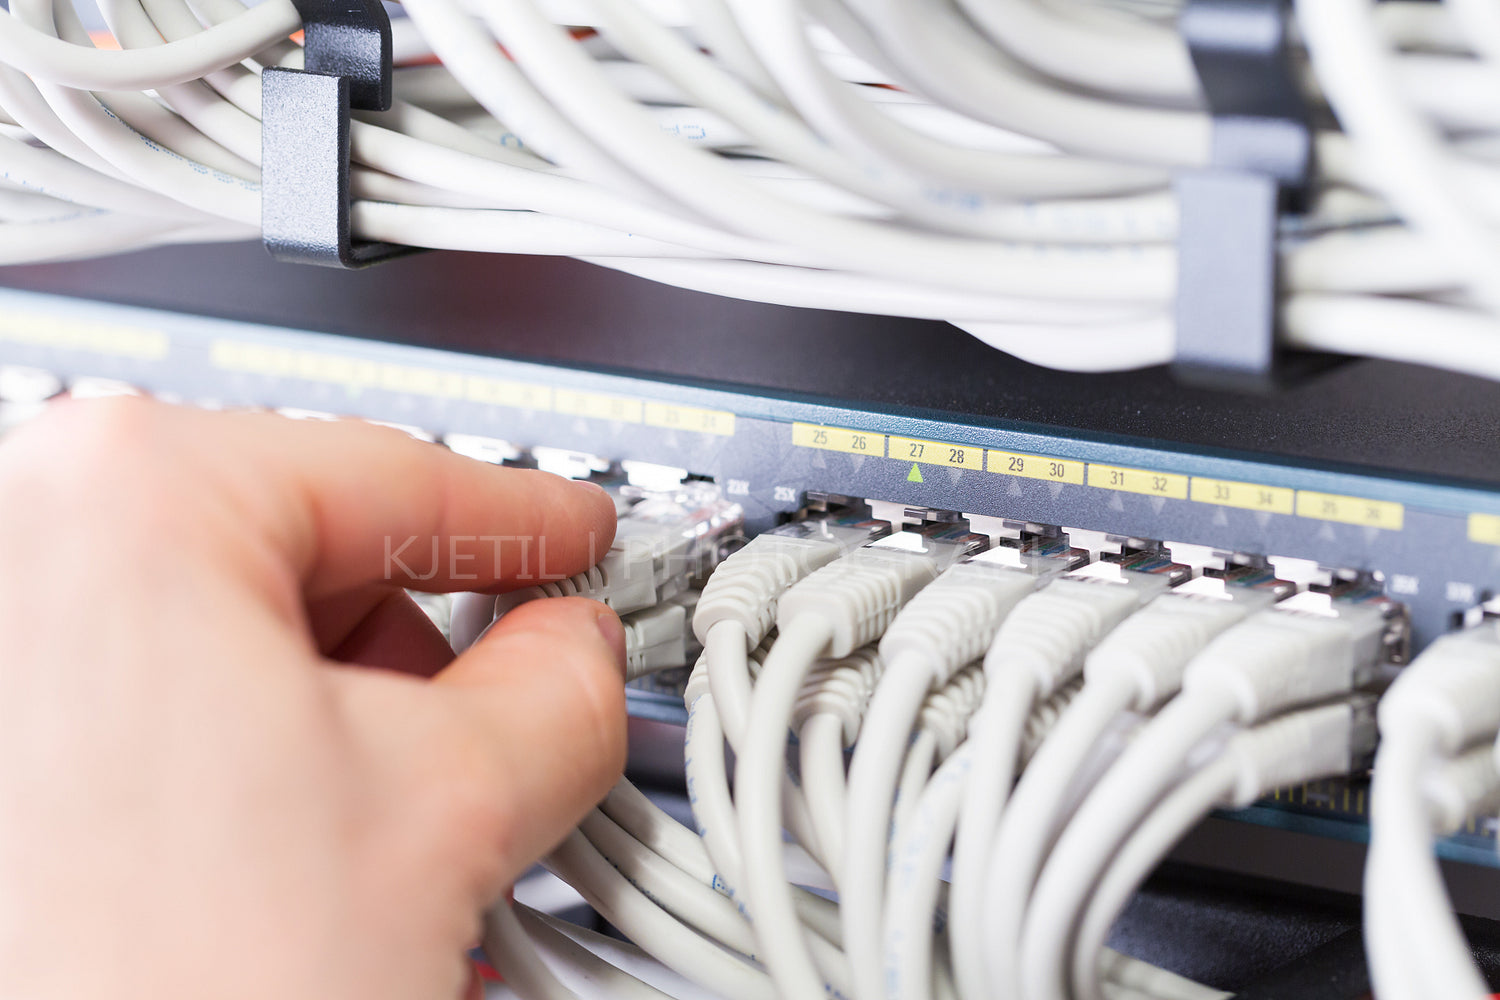 IT consultant connects a network cable into switch in datacenter